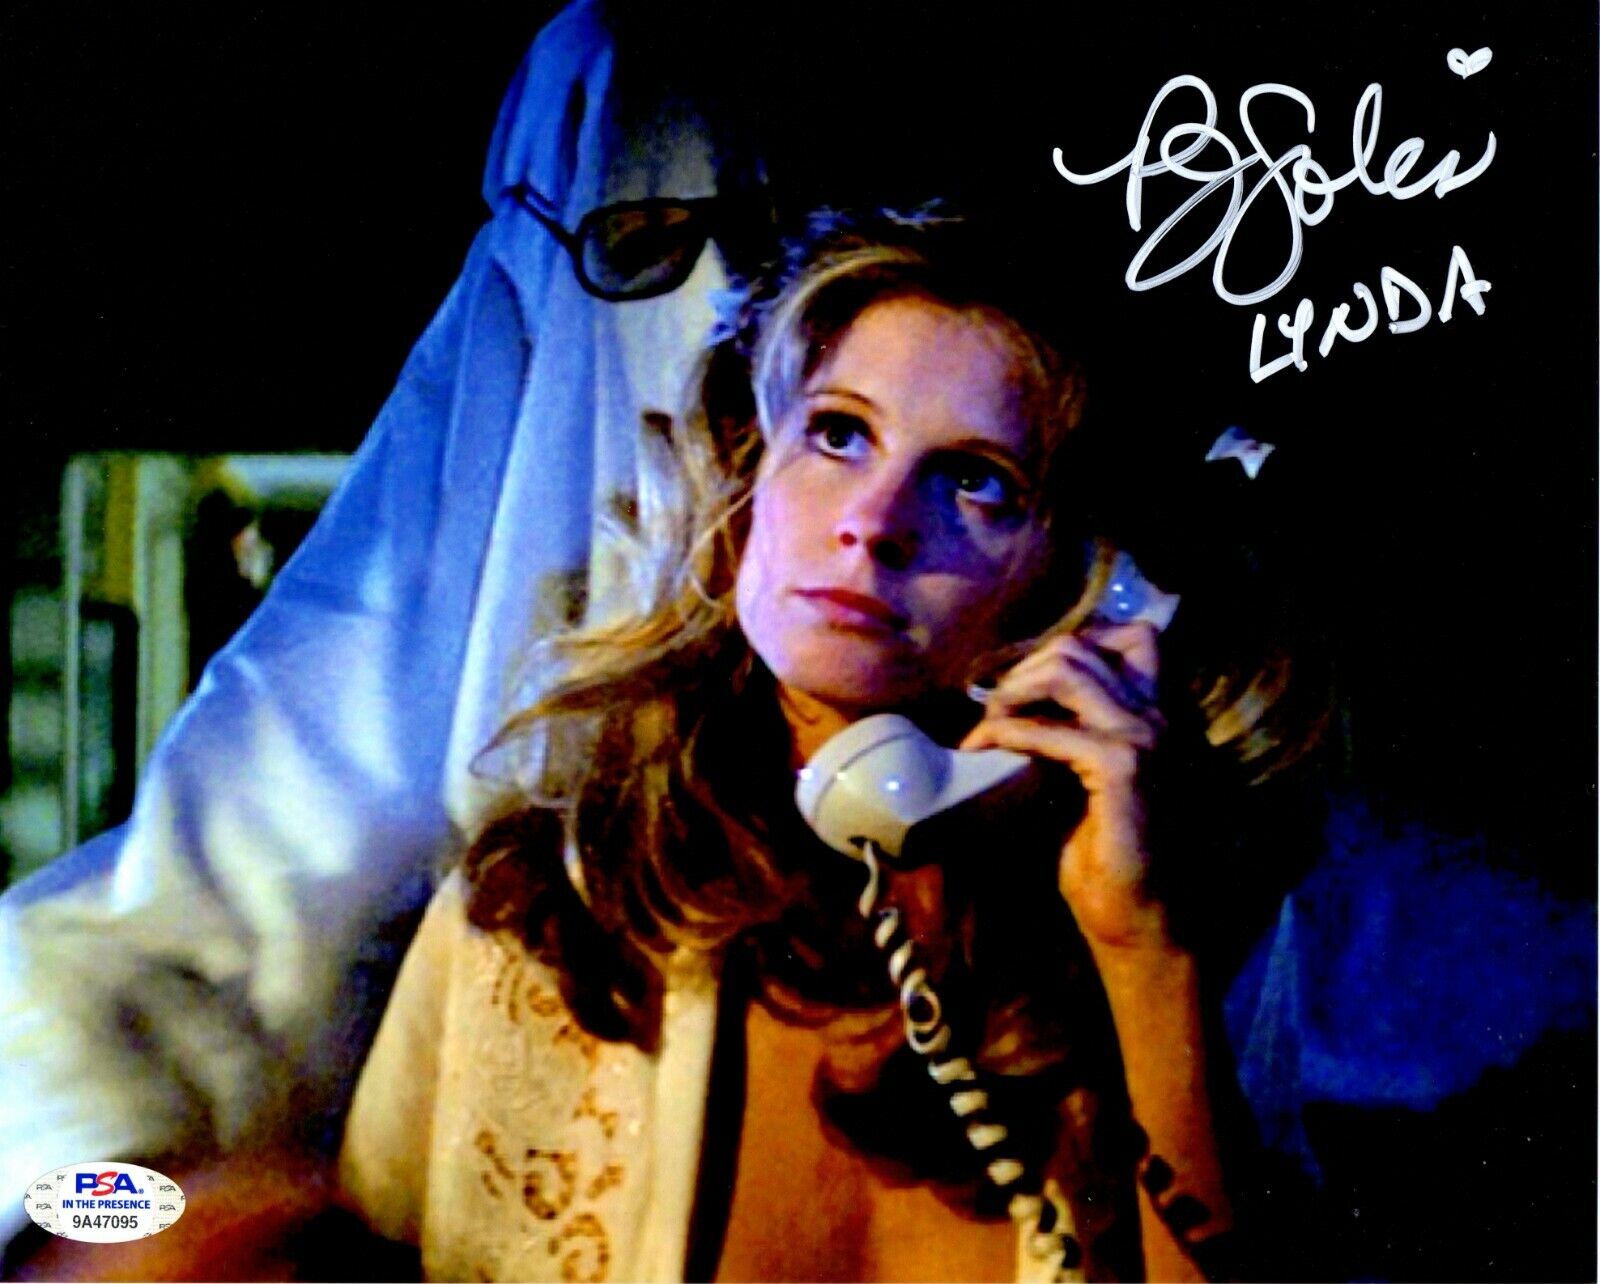 PJ Soles autographed signed 8x10 Photo Poster painting Halloween PSA COA inscribed Lynda